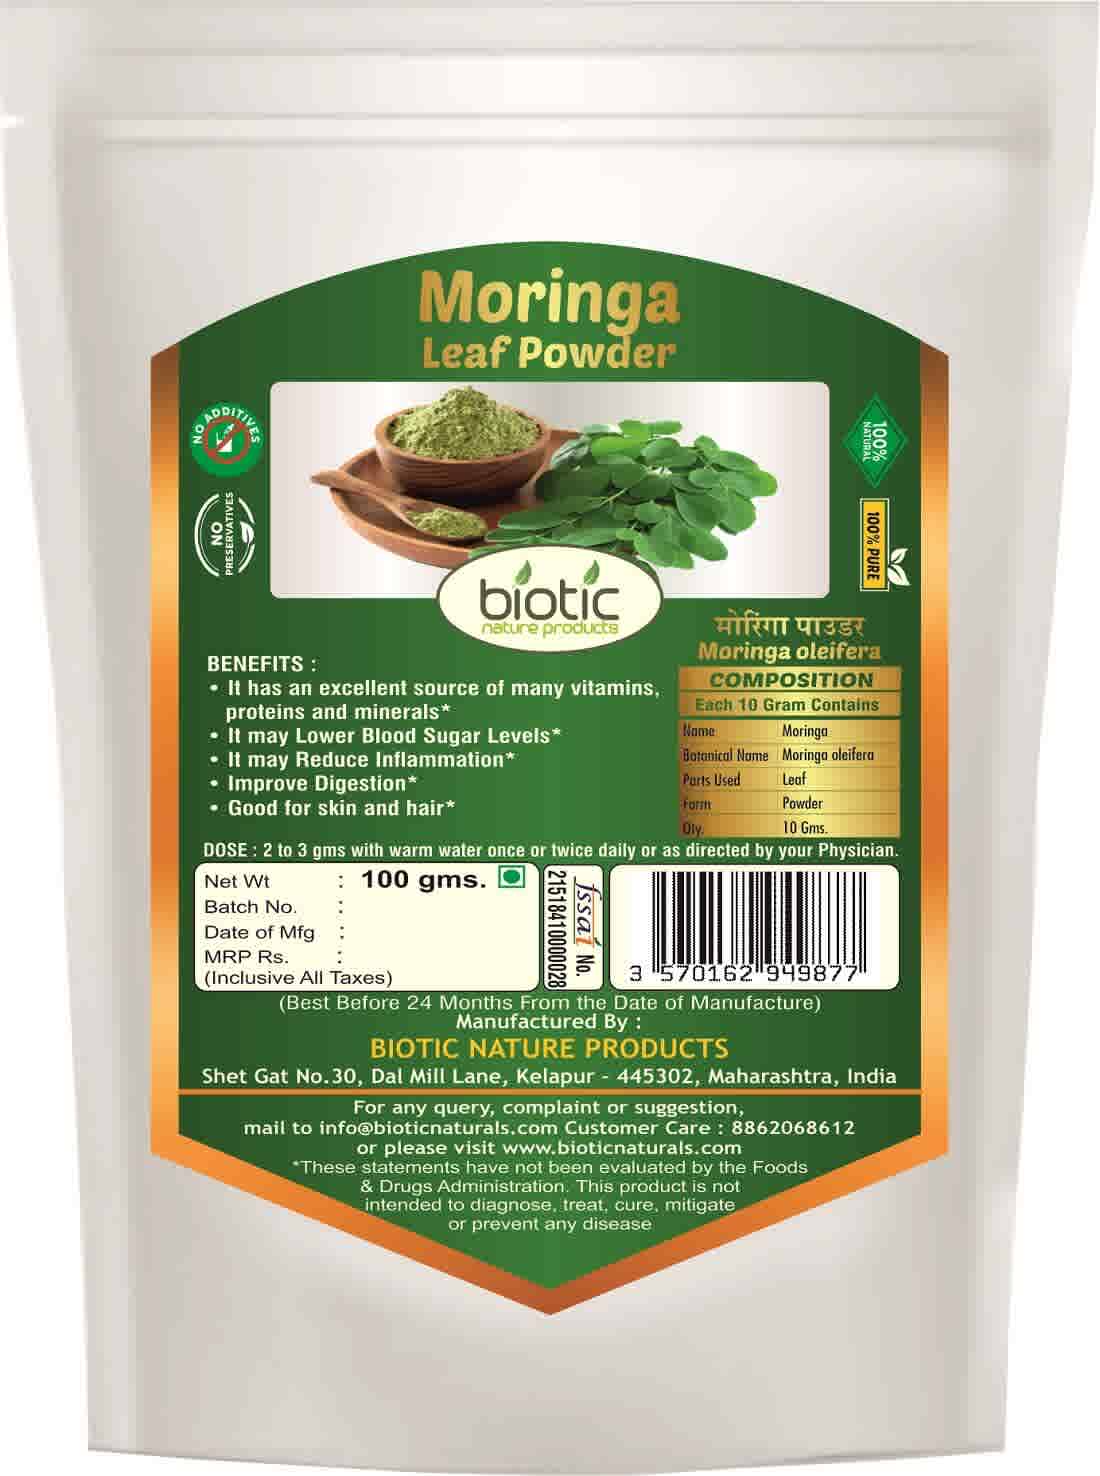 How To Use Moringa Powder And Oil To Promote Healthy Hair Growth